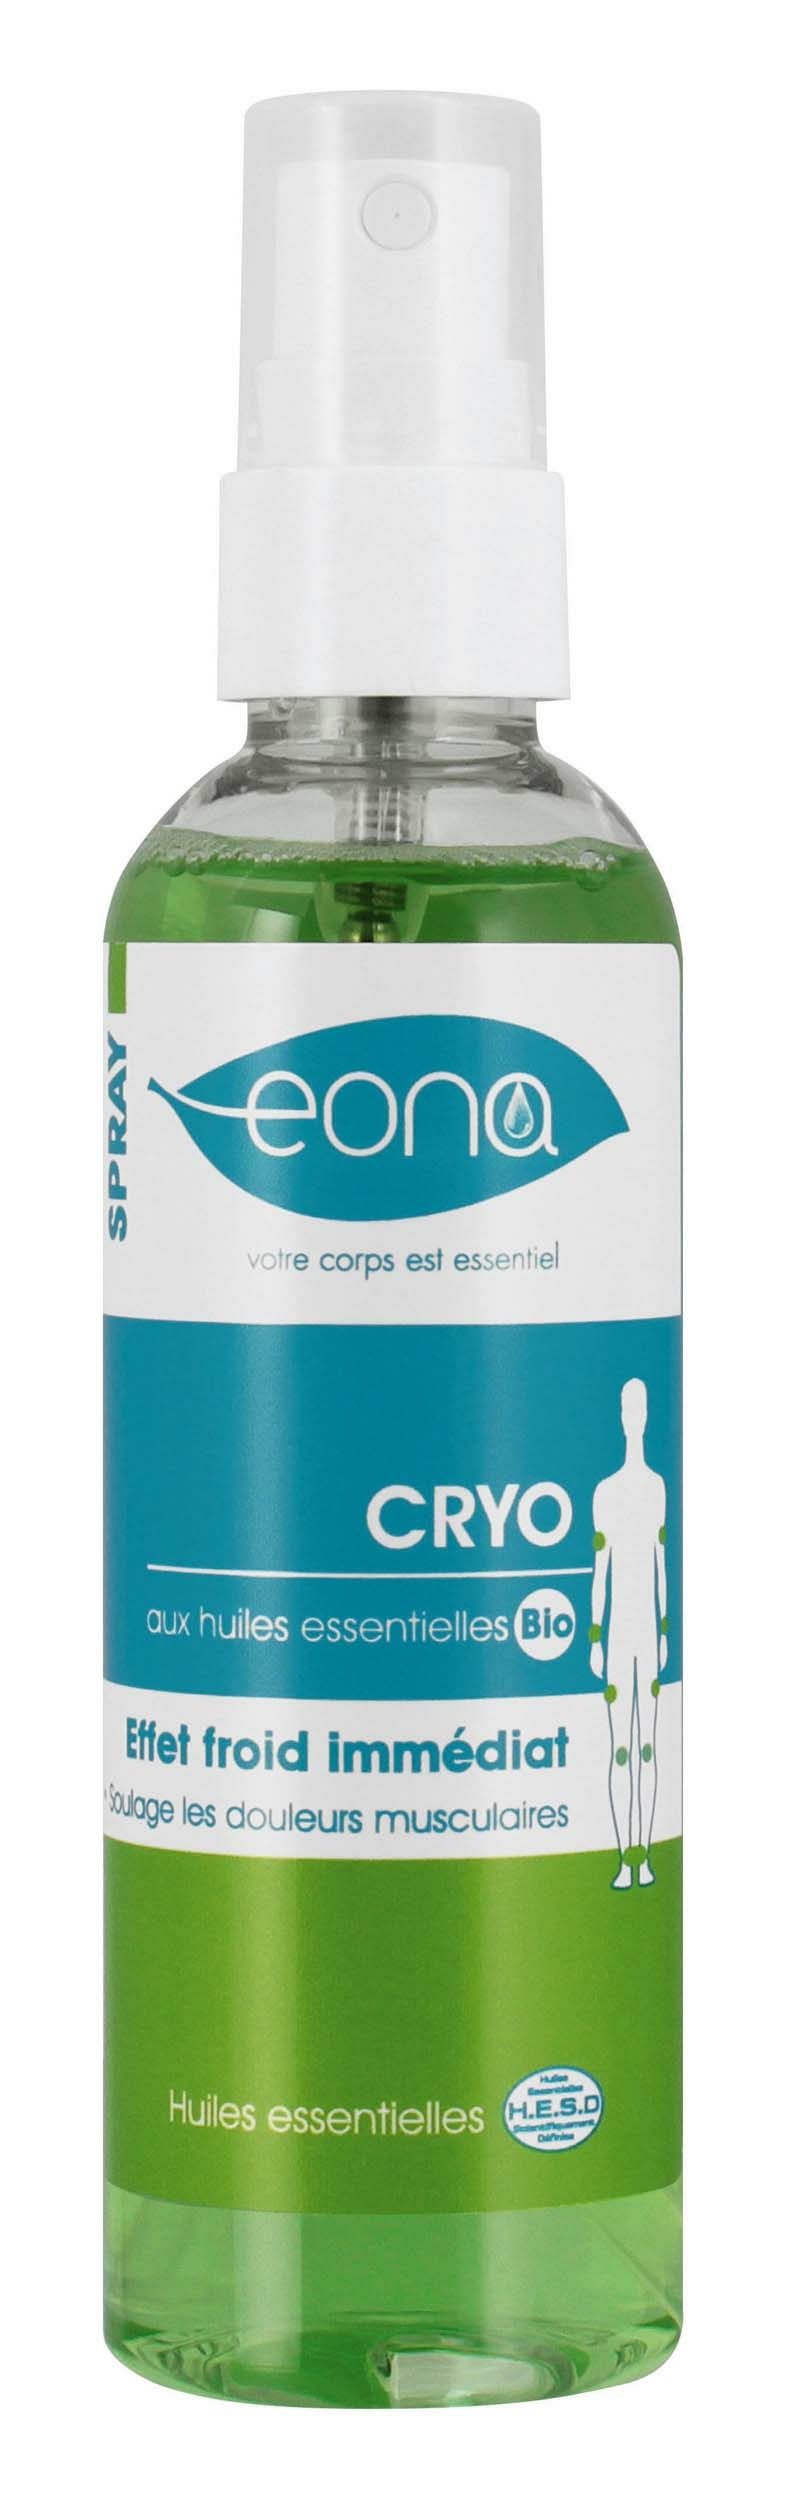 spray cryo eona tablelya 100ml douleurs musculaires articulaires 2101404000-1